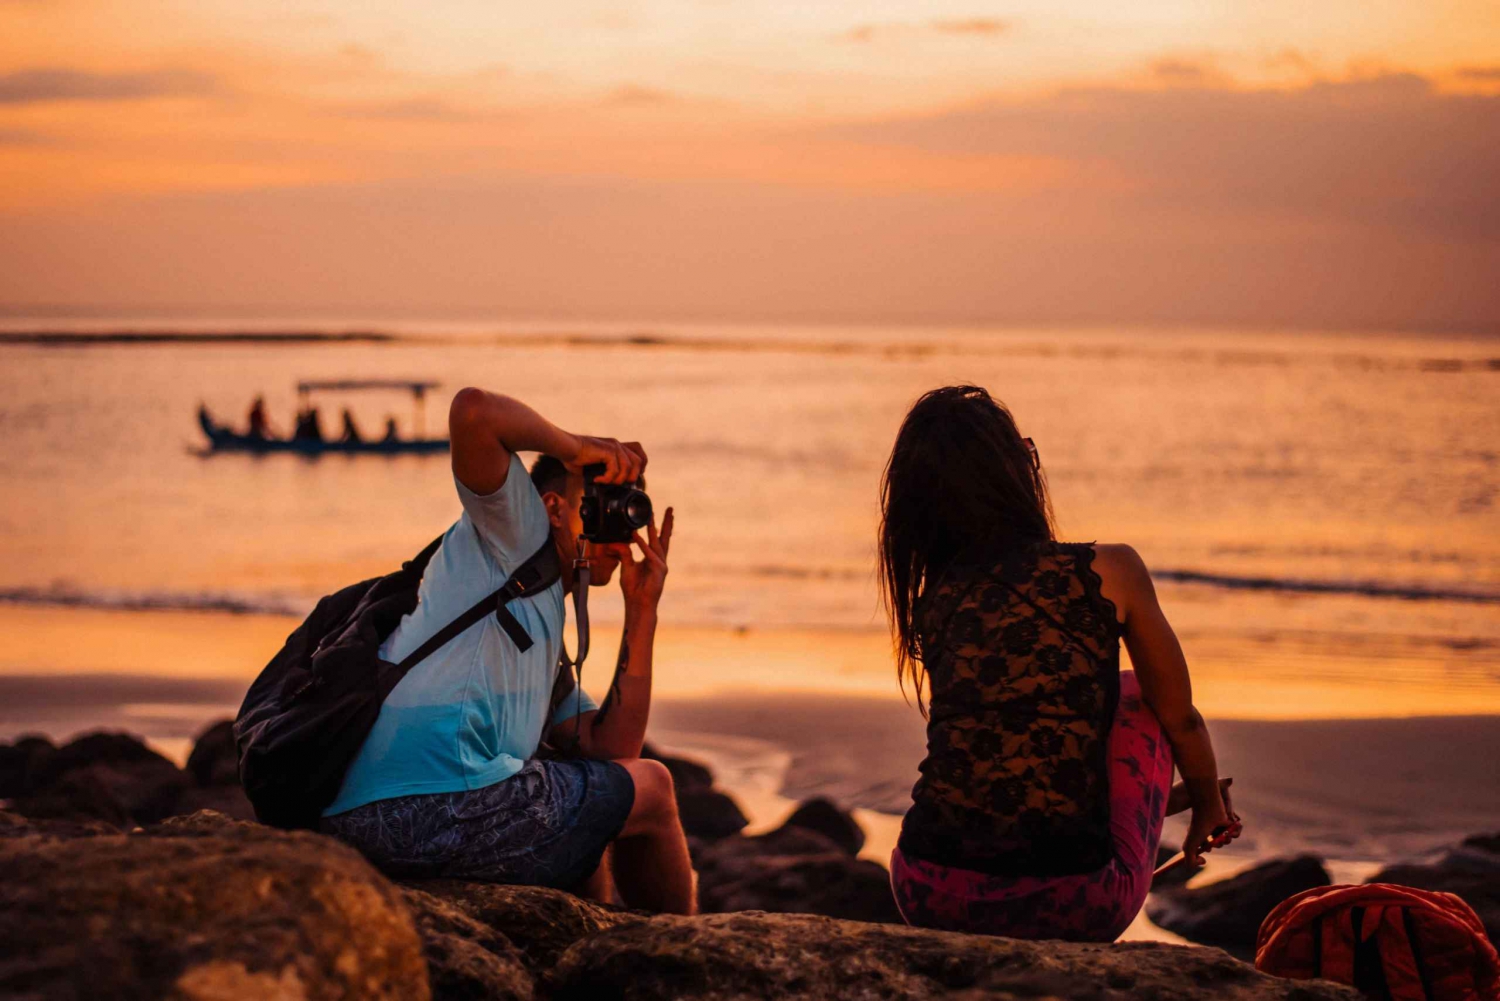 Bali: Private Photoshoot with Vacation Photographer